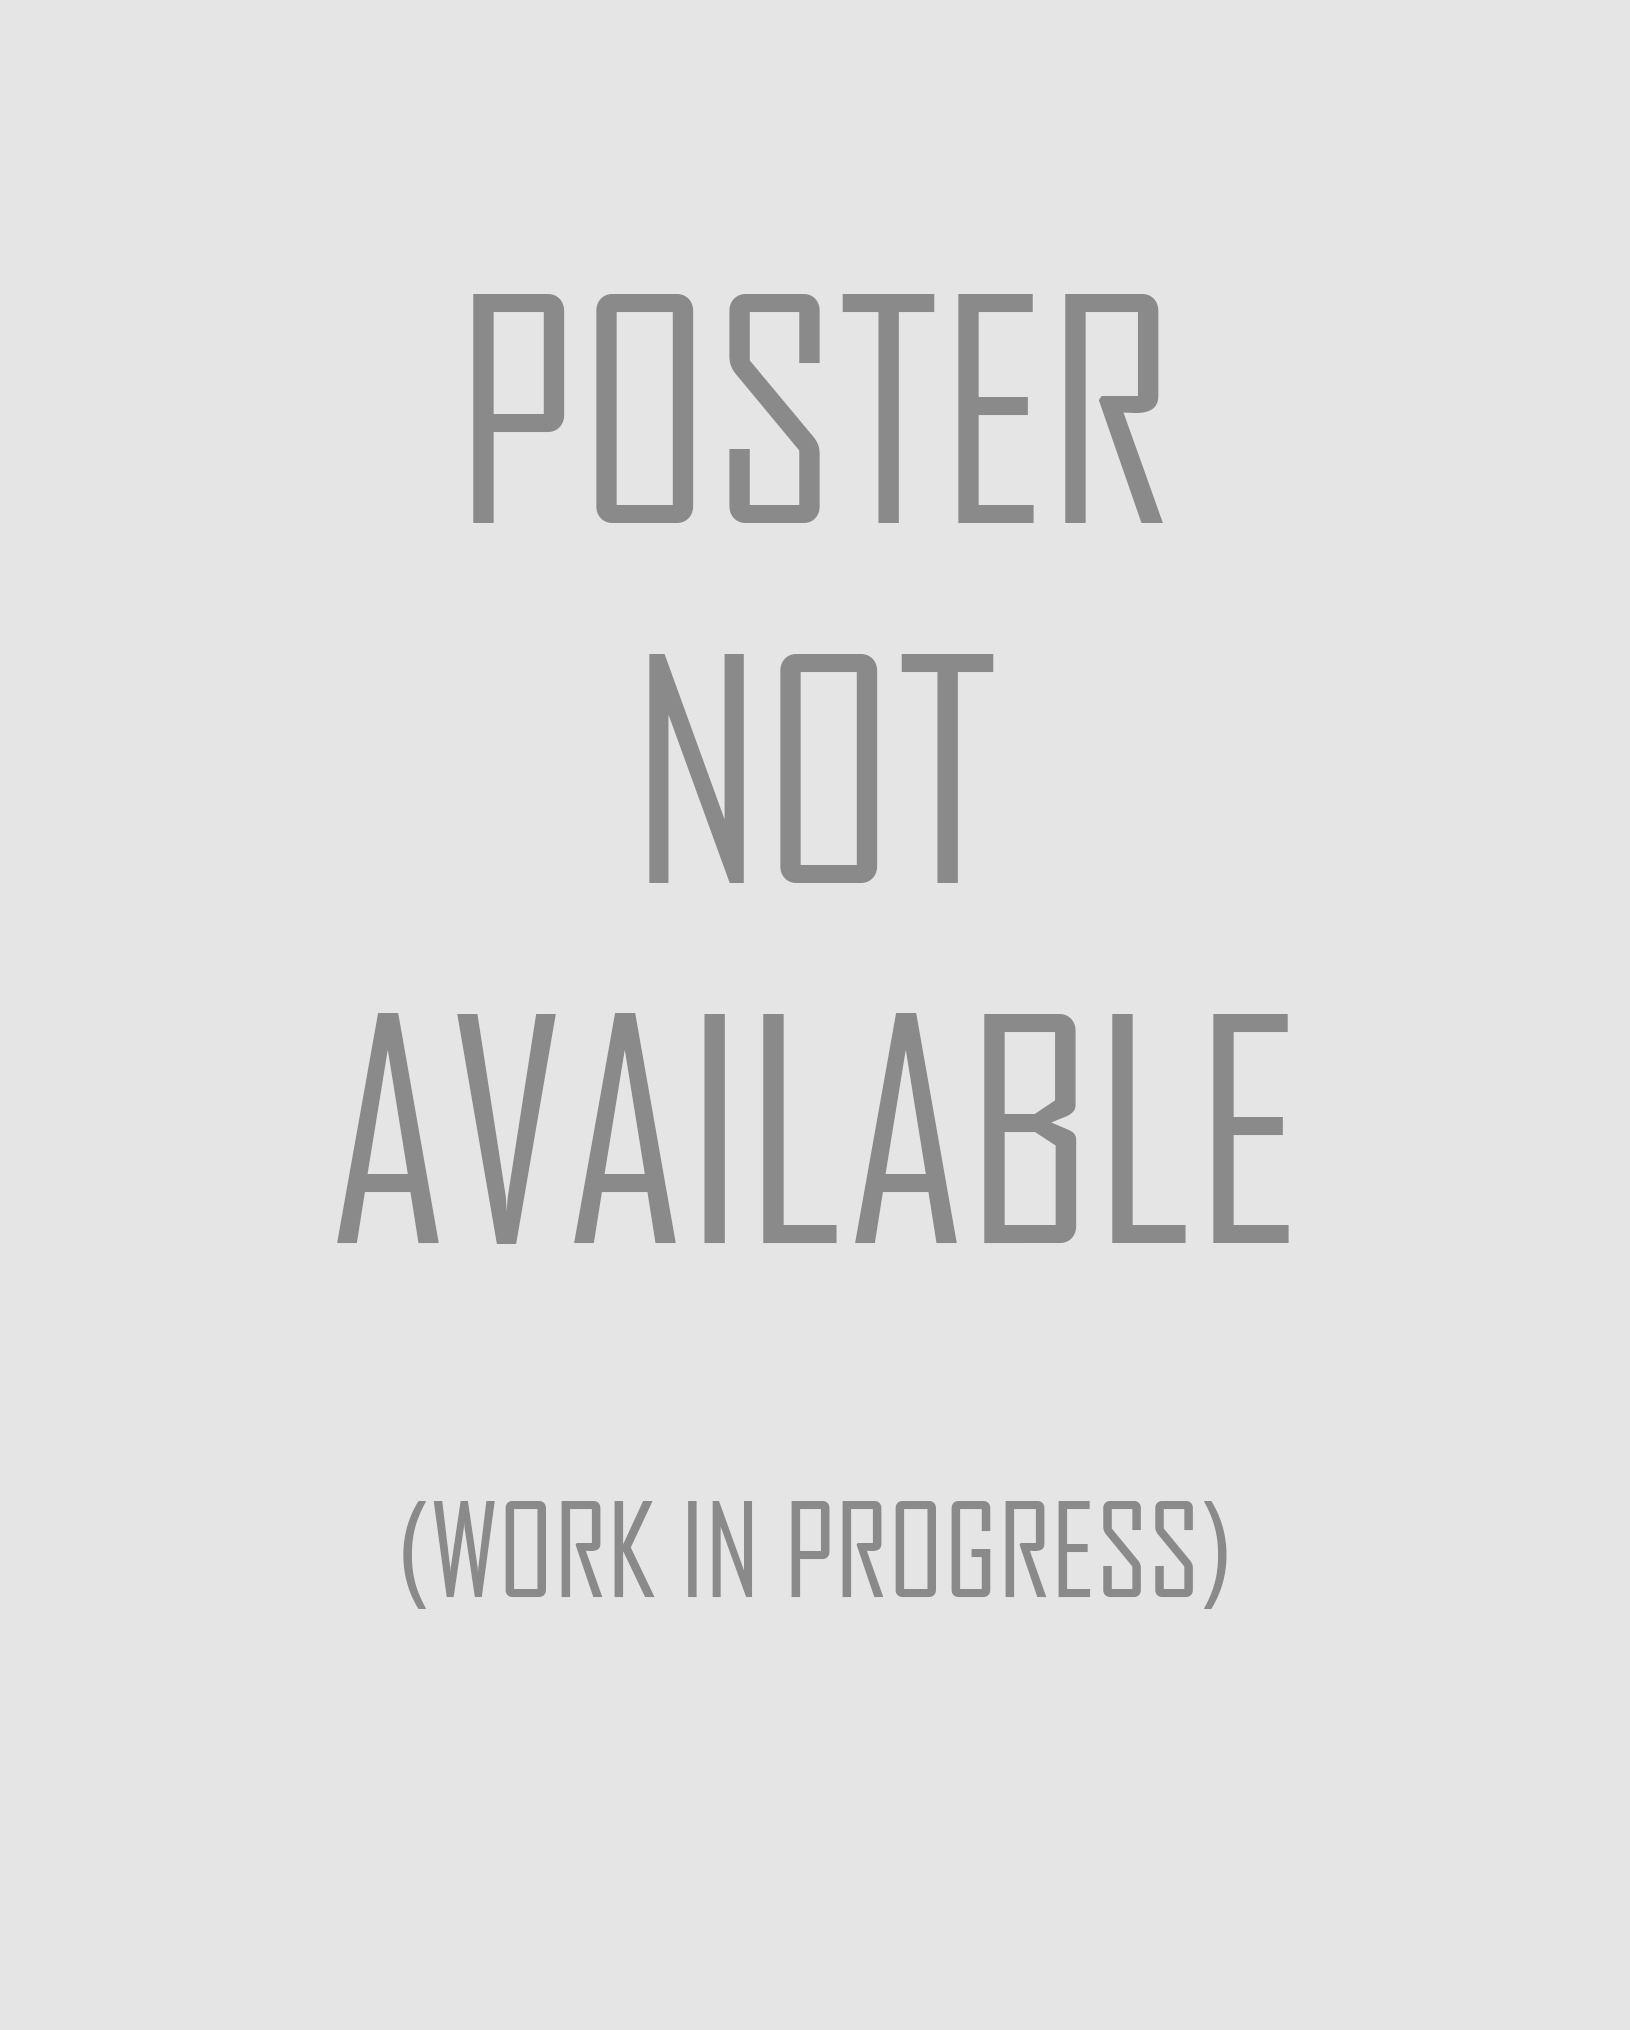 Poster Not Available